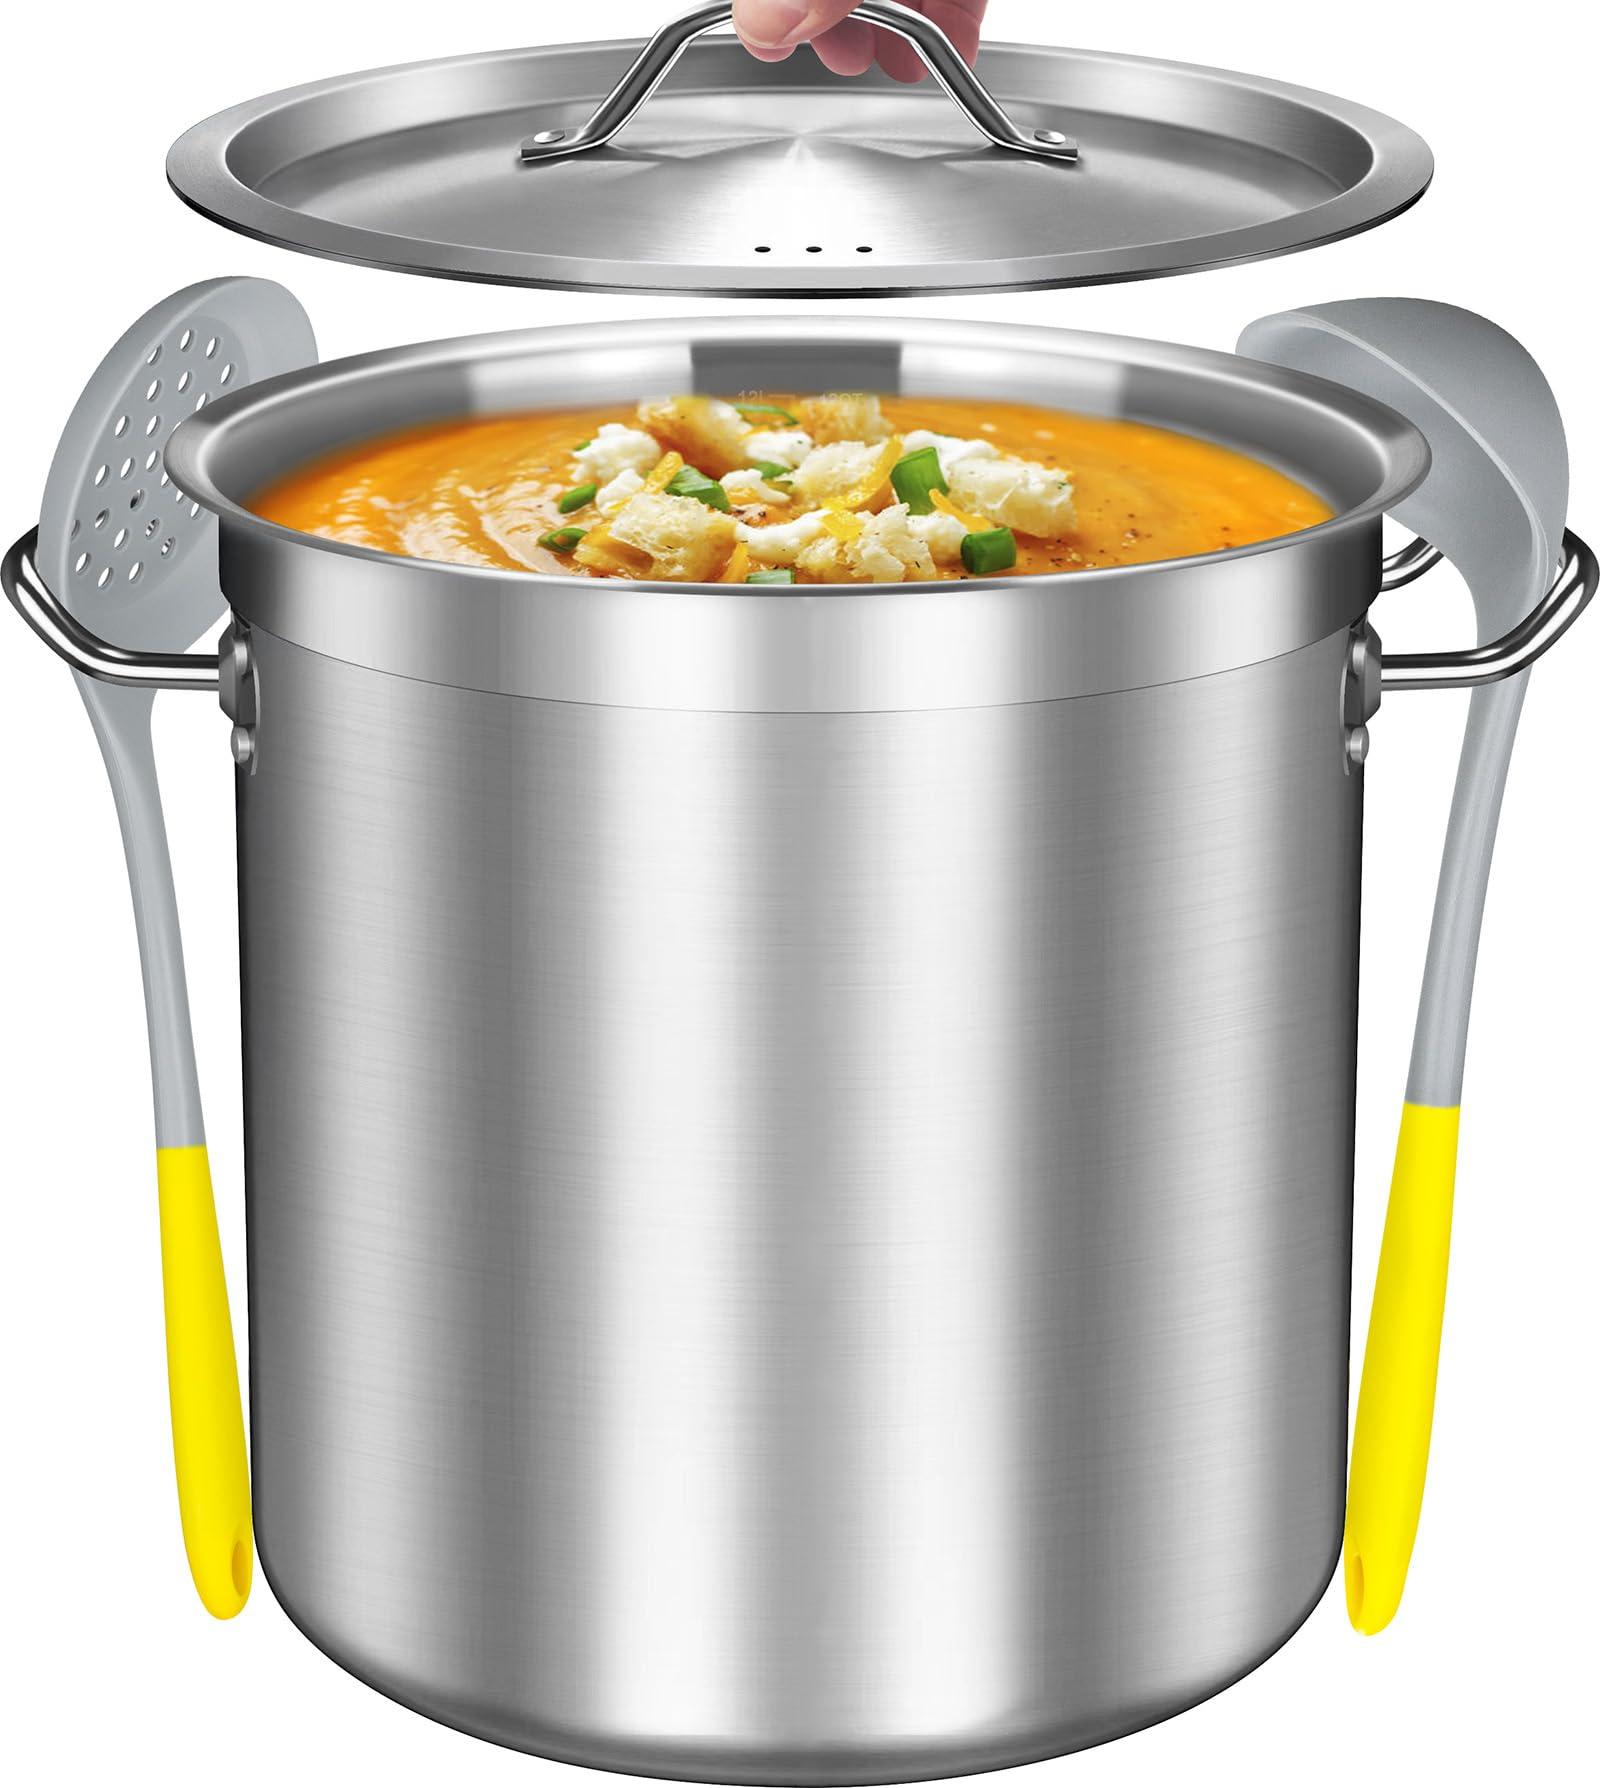 Falaja Stainless Steel Stock Pot - Big Pots for Cooking - Heavy Duty Induction Pot - Soup Pot with Lid - 12 Quart - CookCave